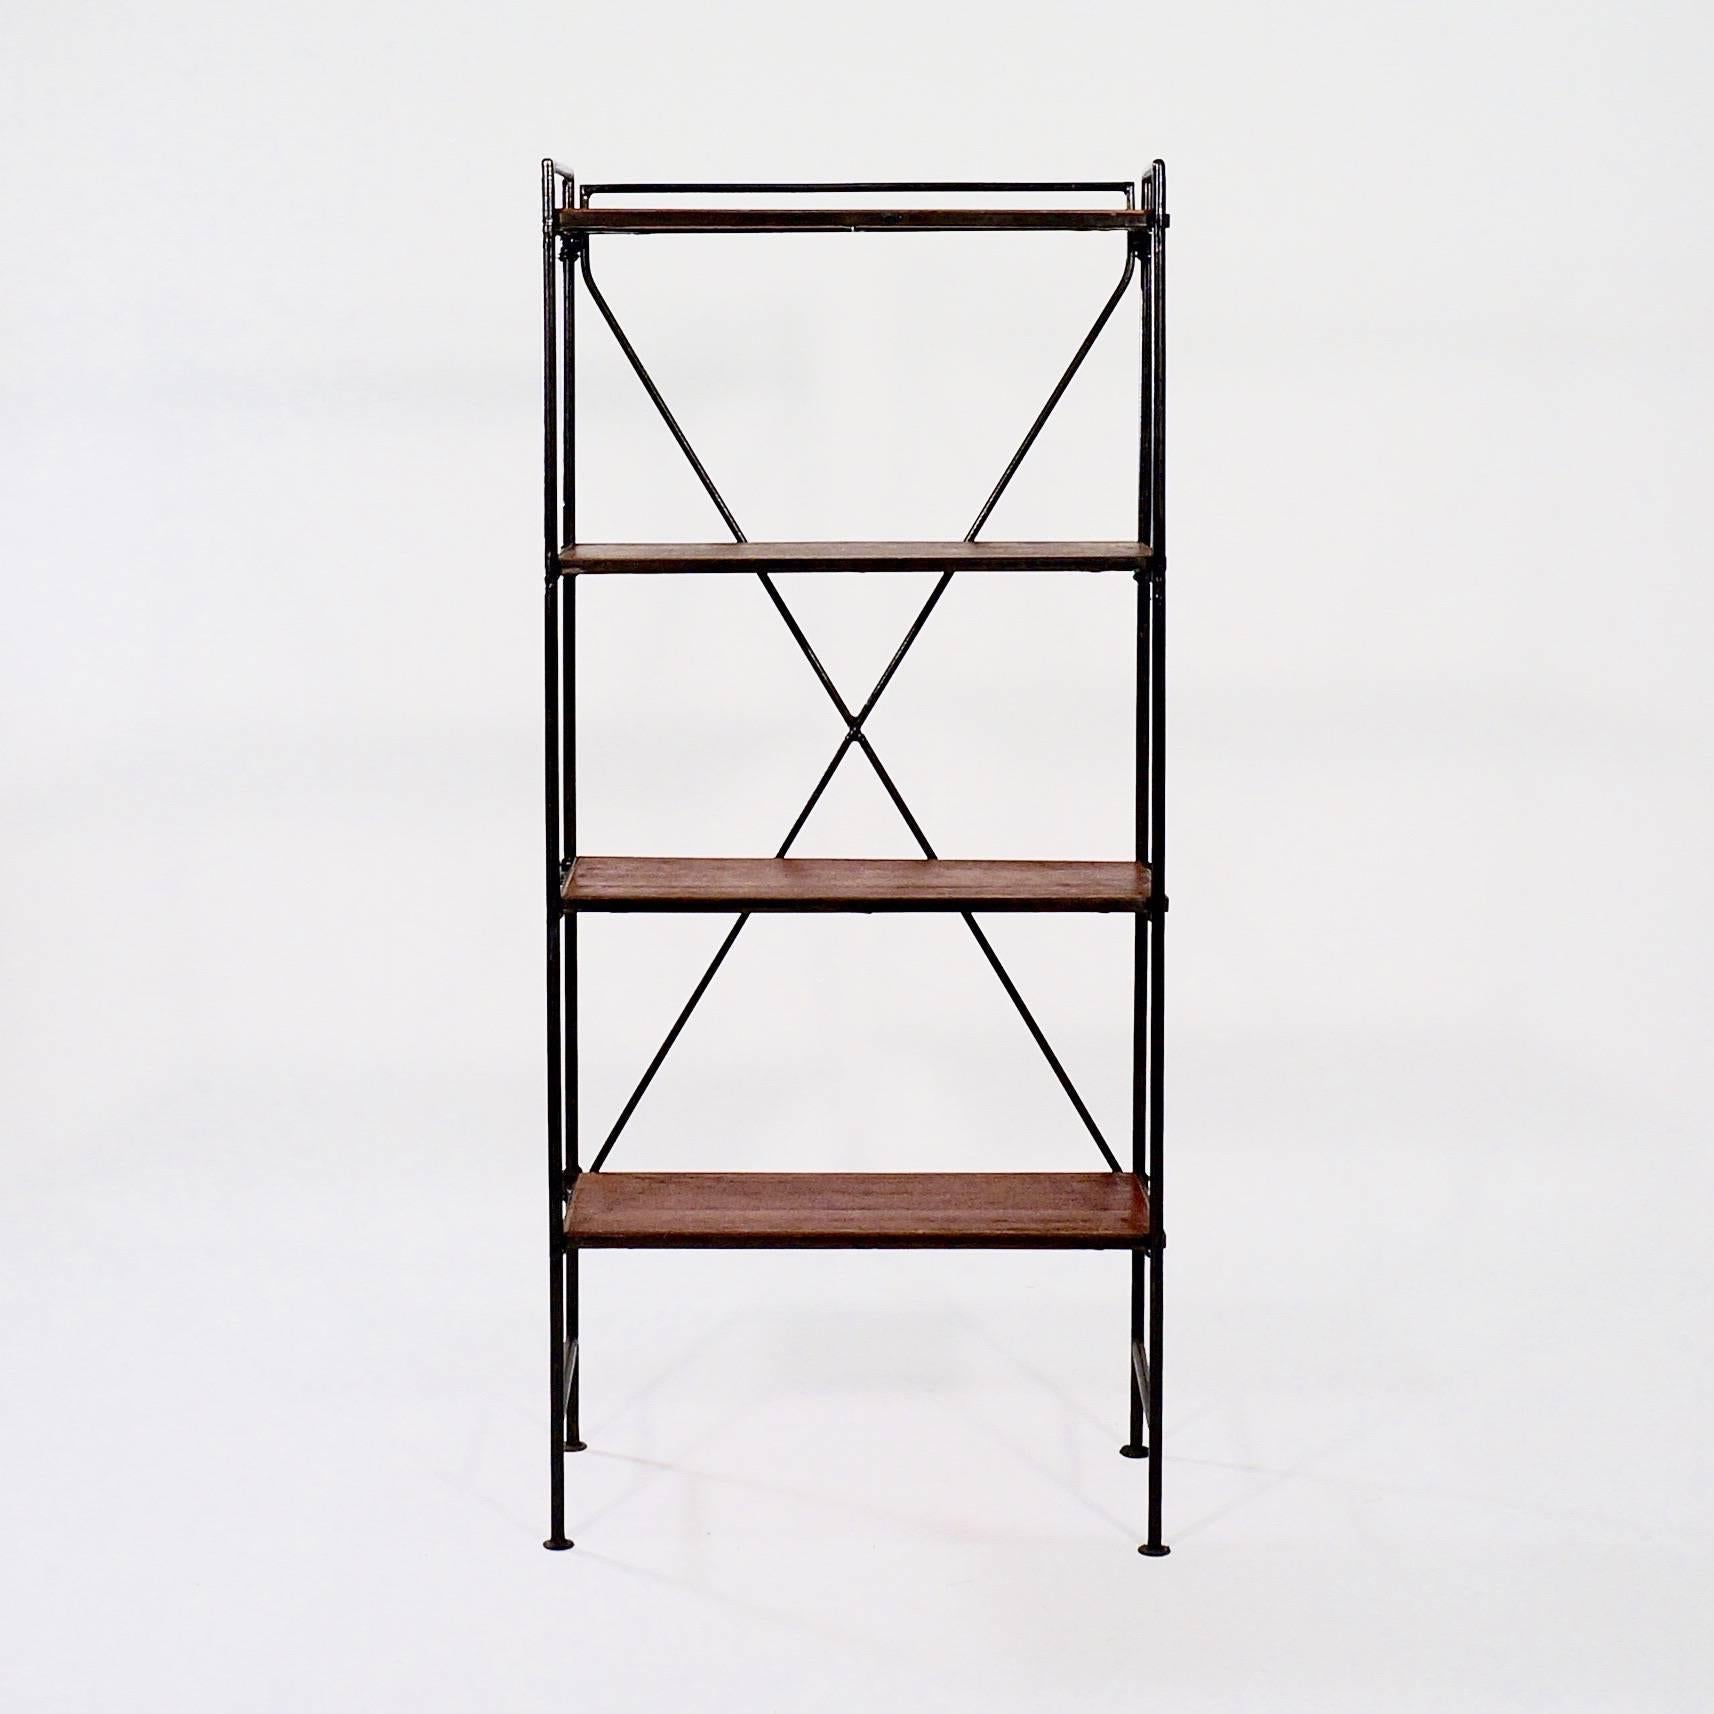 The collapsible ebonized wrought iron frame with four disc feet supporting four hinged teak shelves,
 
France, circa 1940s.